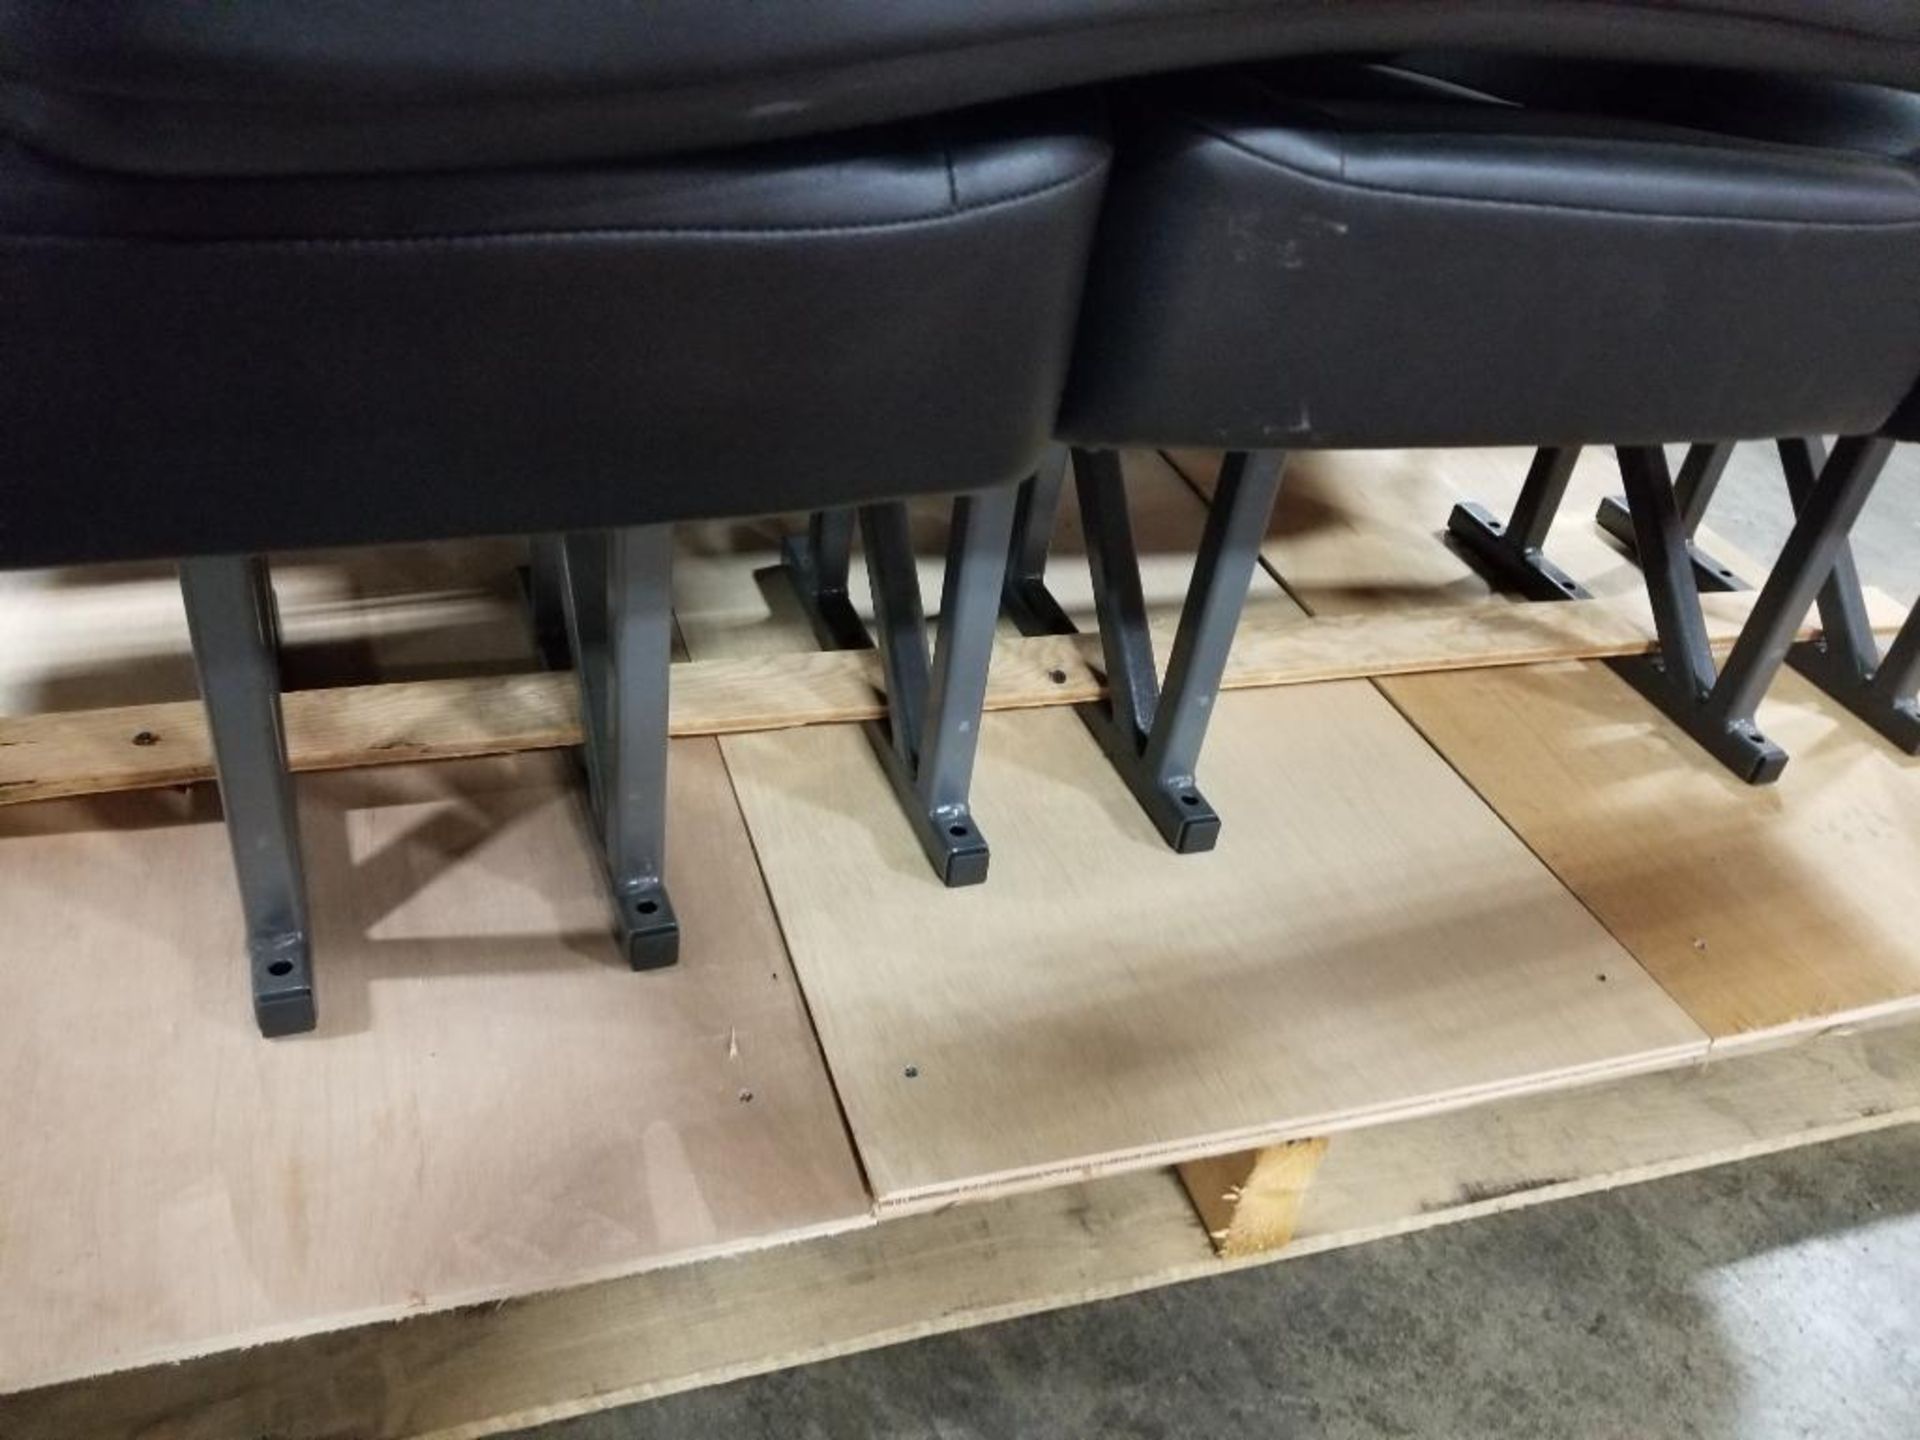 Qty 4 - Smart Floor Seating row seats. - Image 8 of 11